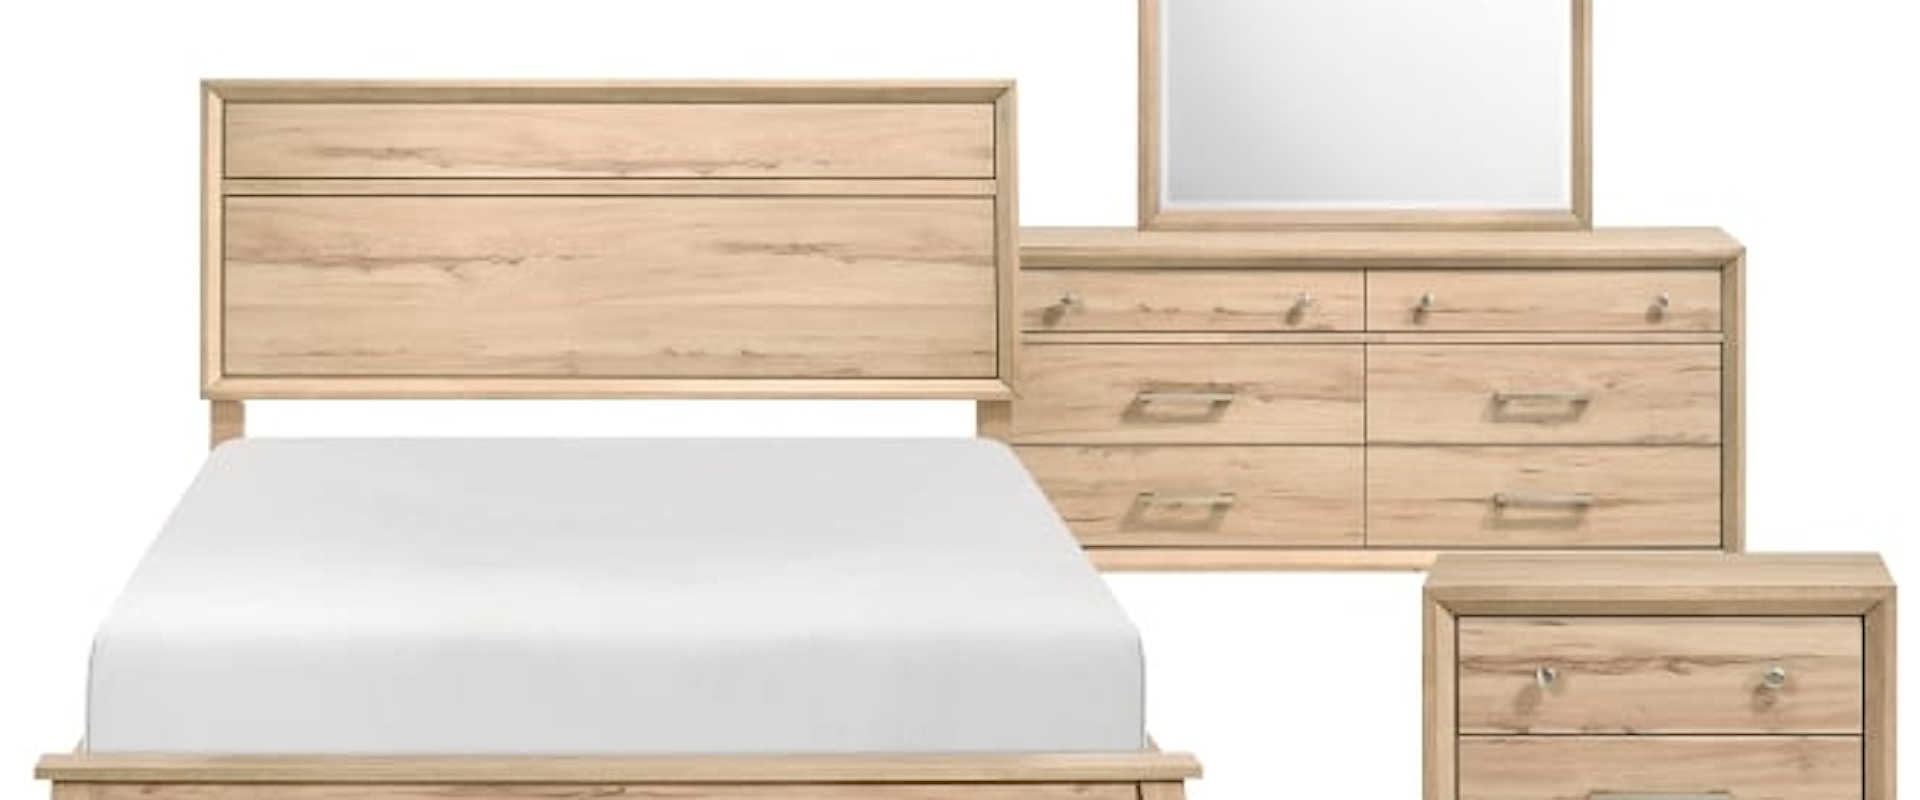 Mid-Century Modern 4-Piece Queen Bedroom Set with Natural Oak Finish